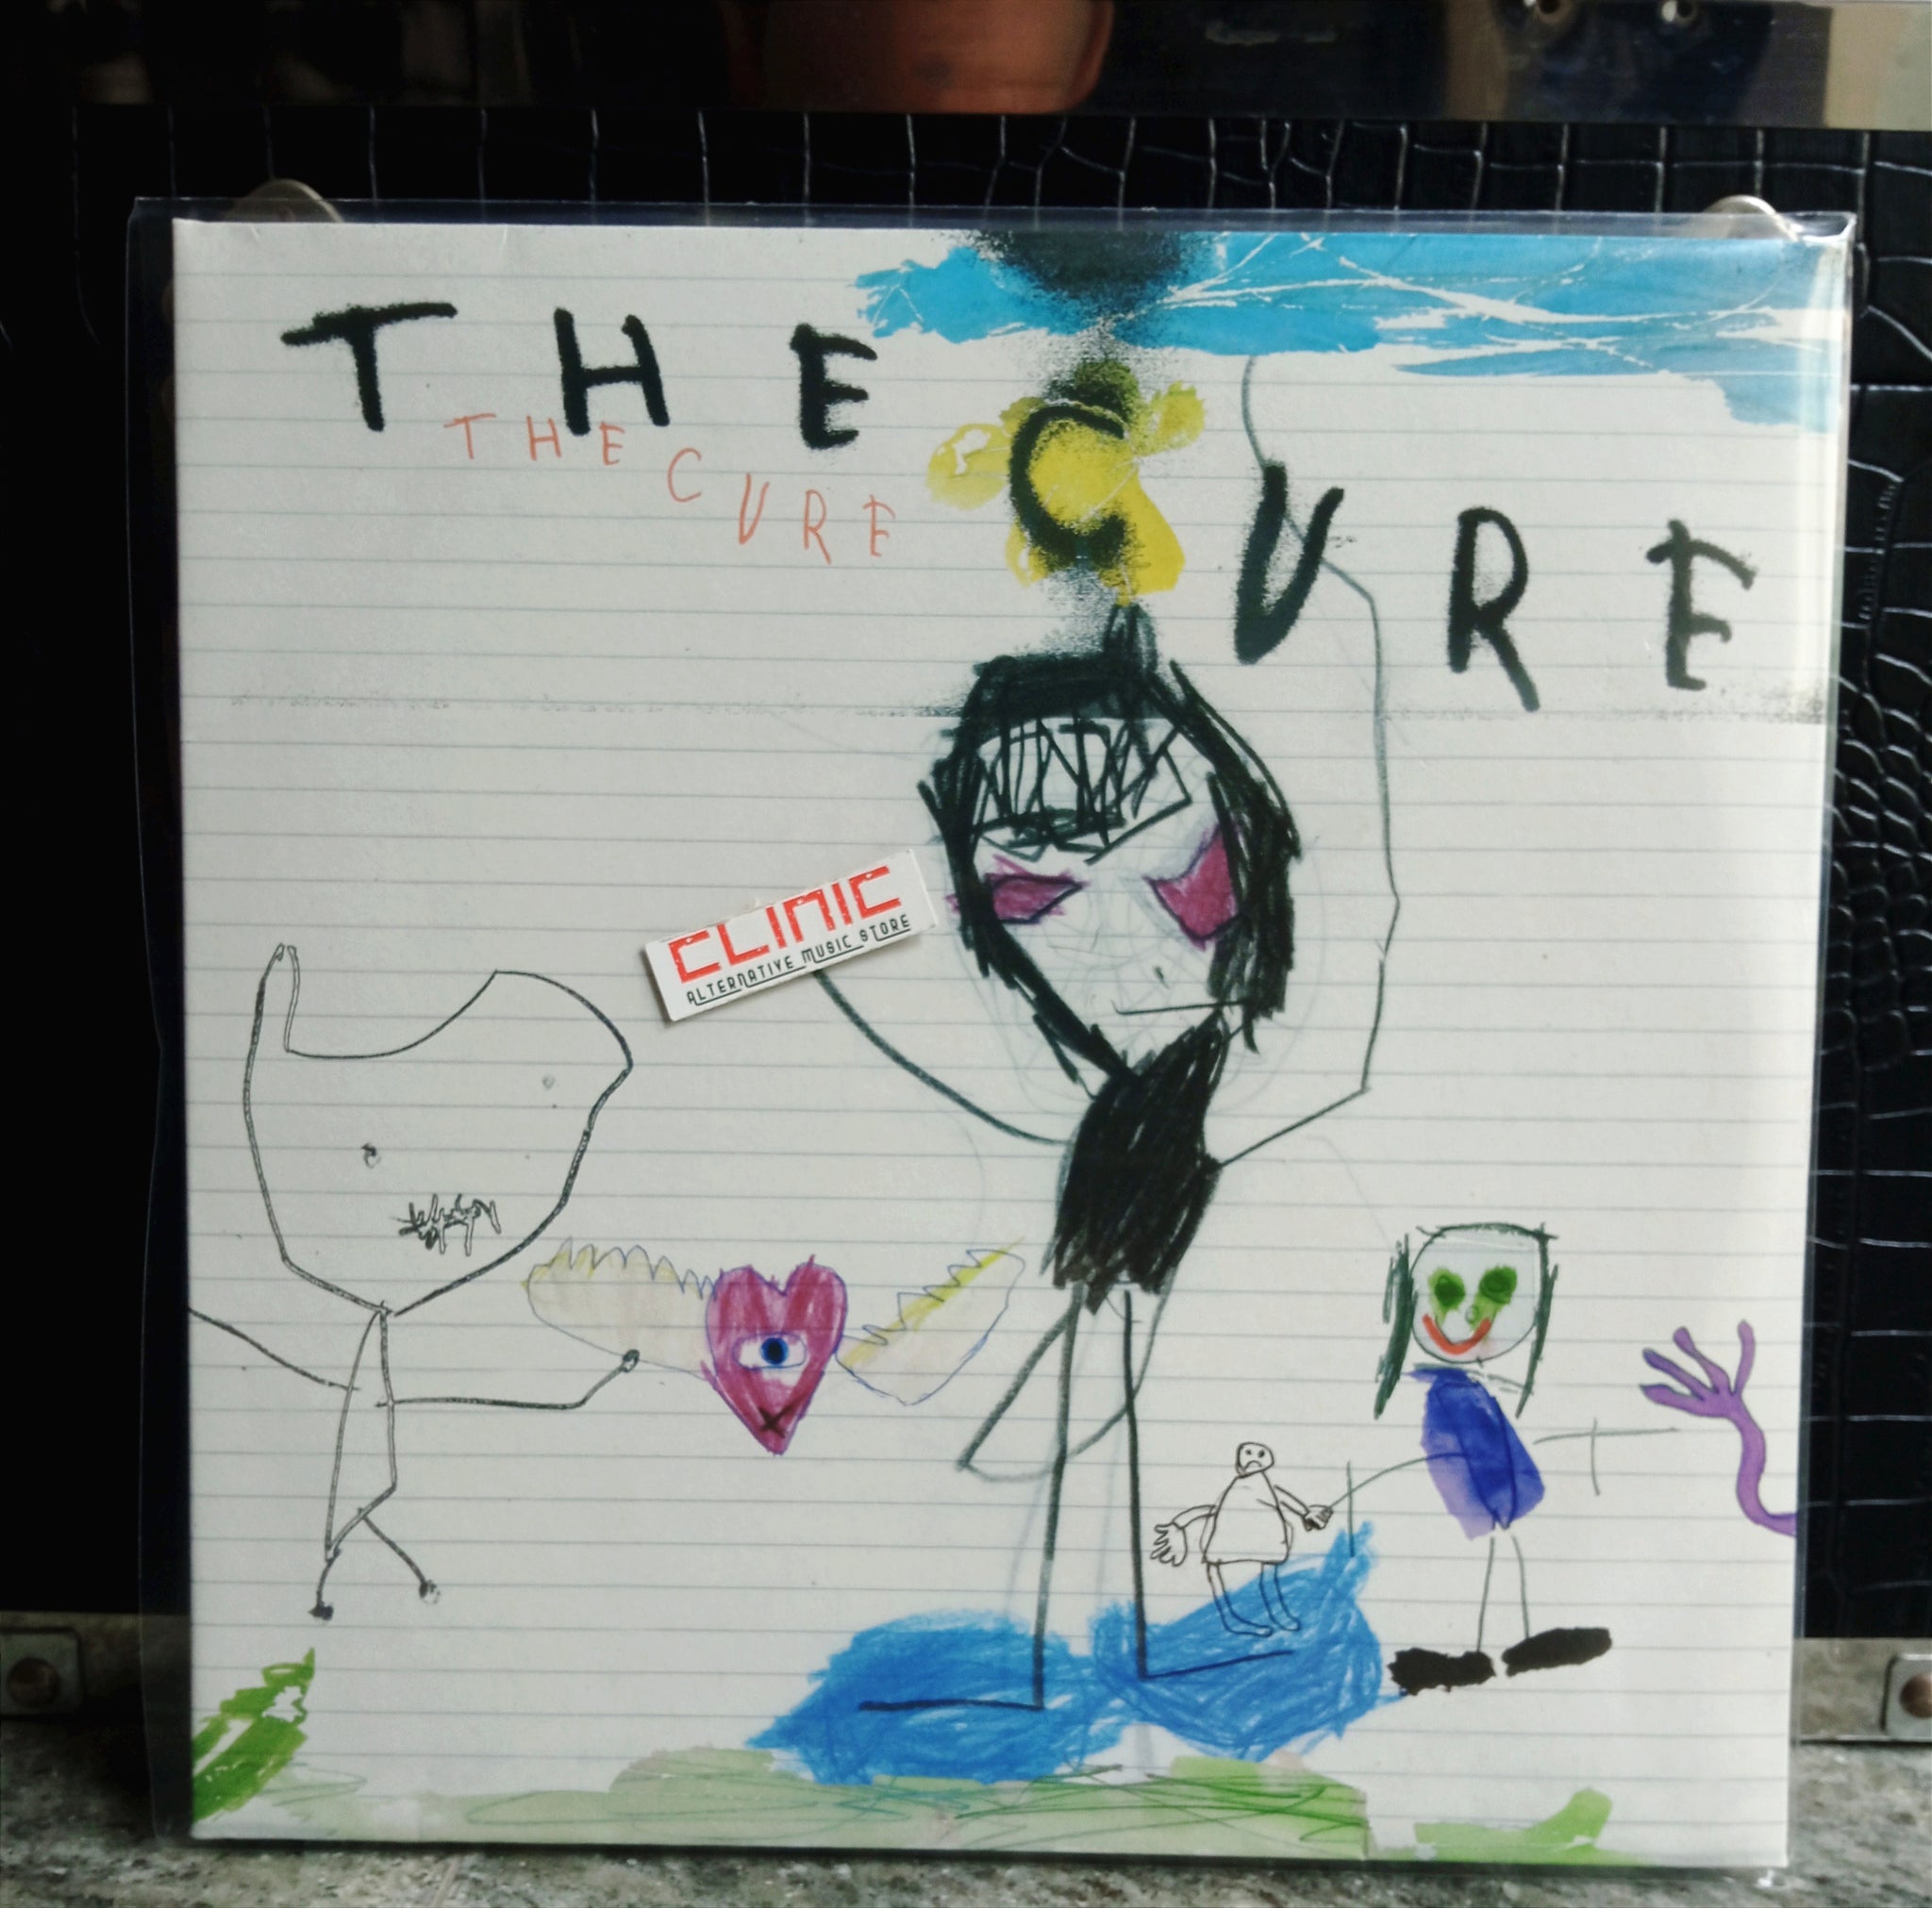 LP - THE CURE - THE CURE (usato)